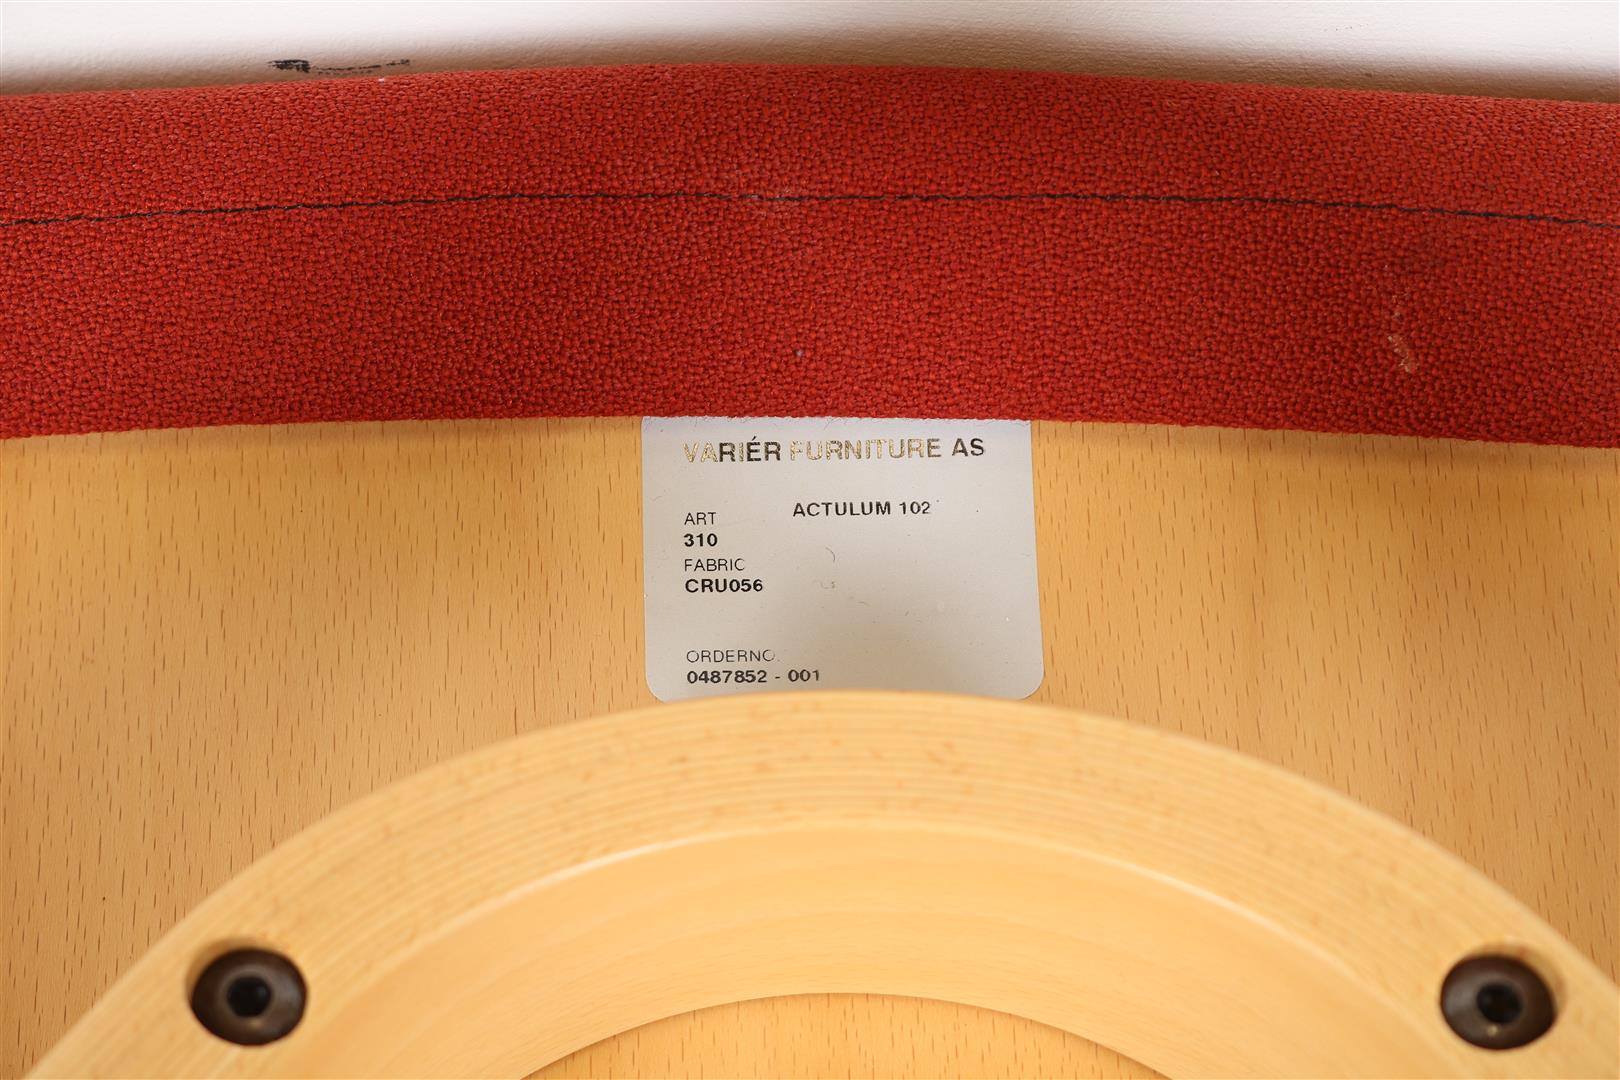 Beech wood balance chair with red upholstery, Peter Opsvik for Stokke Varier, model Aculum, Norway. - Image 5 of 5